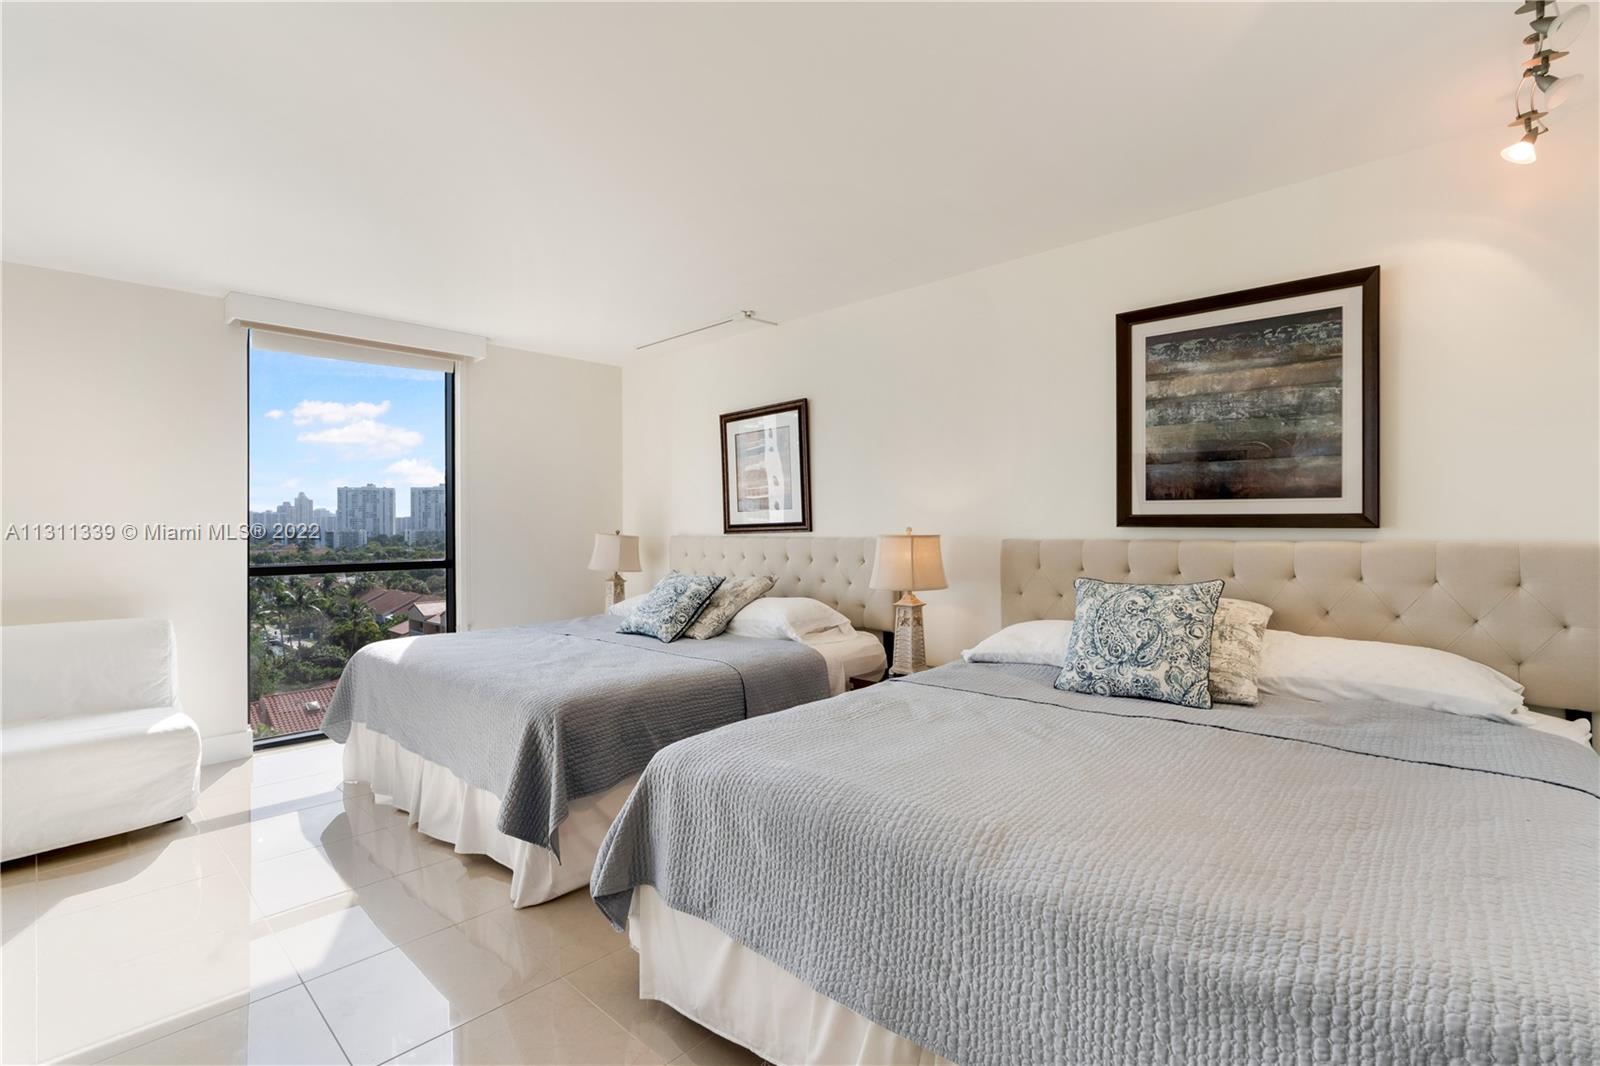 Enjoy this master bedroom with fabulous views and plenty of space